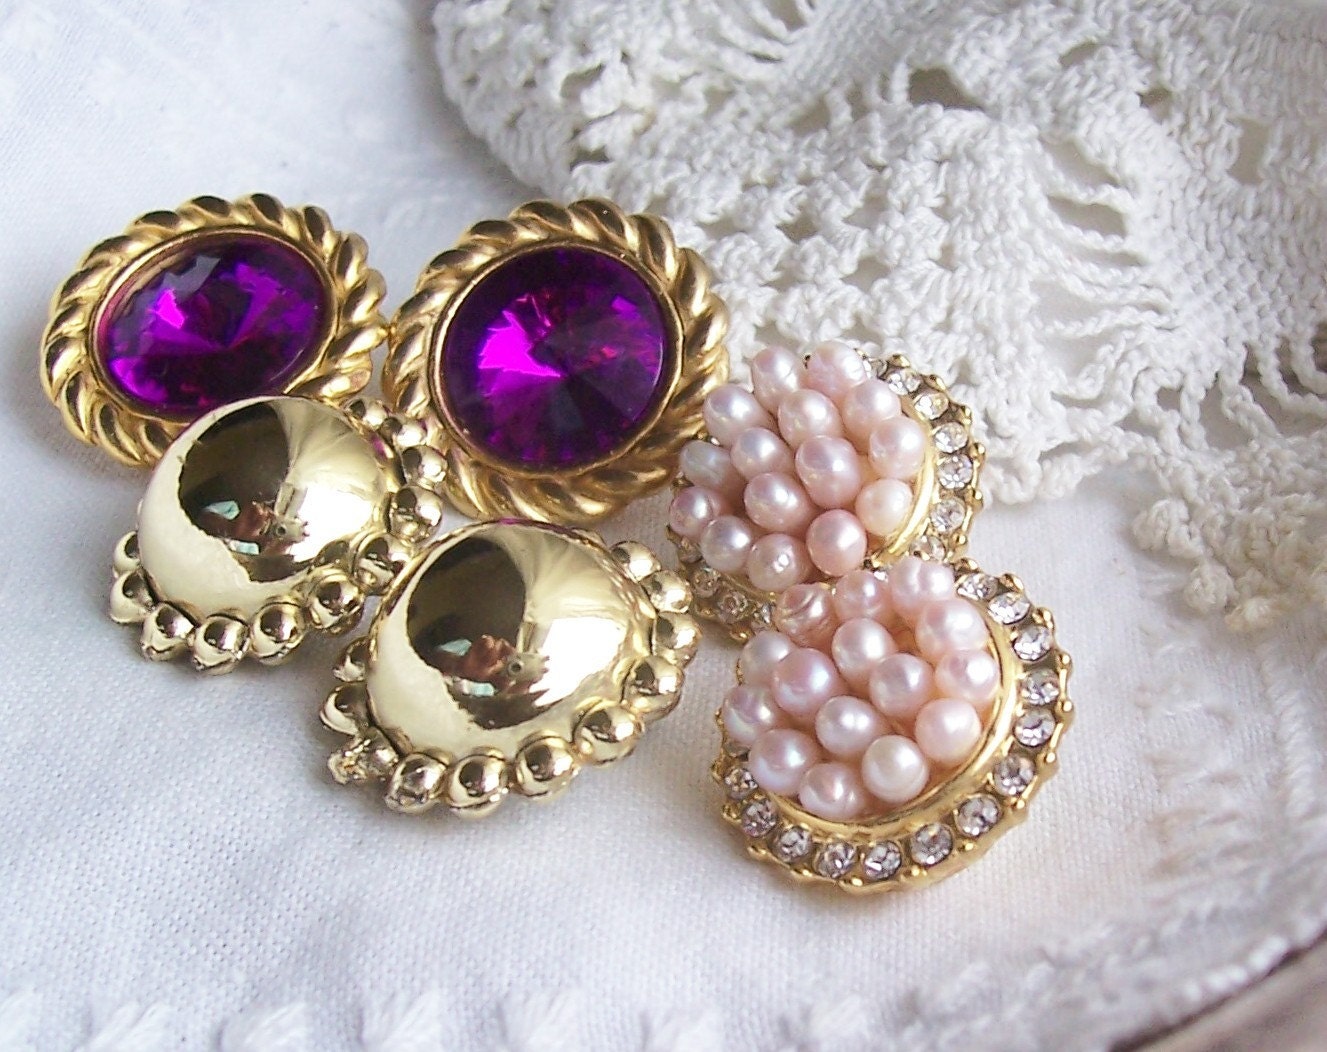 Retro Ear Bobs - 3 Pair of Vintage Clip On Earrings for Wear or ReCreation